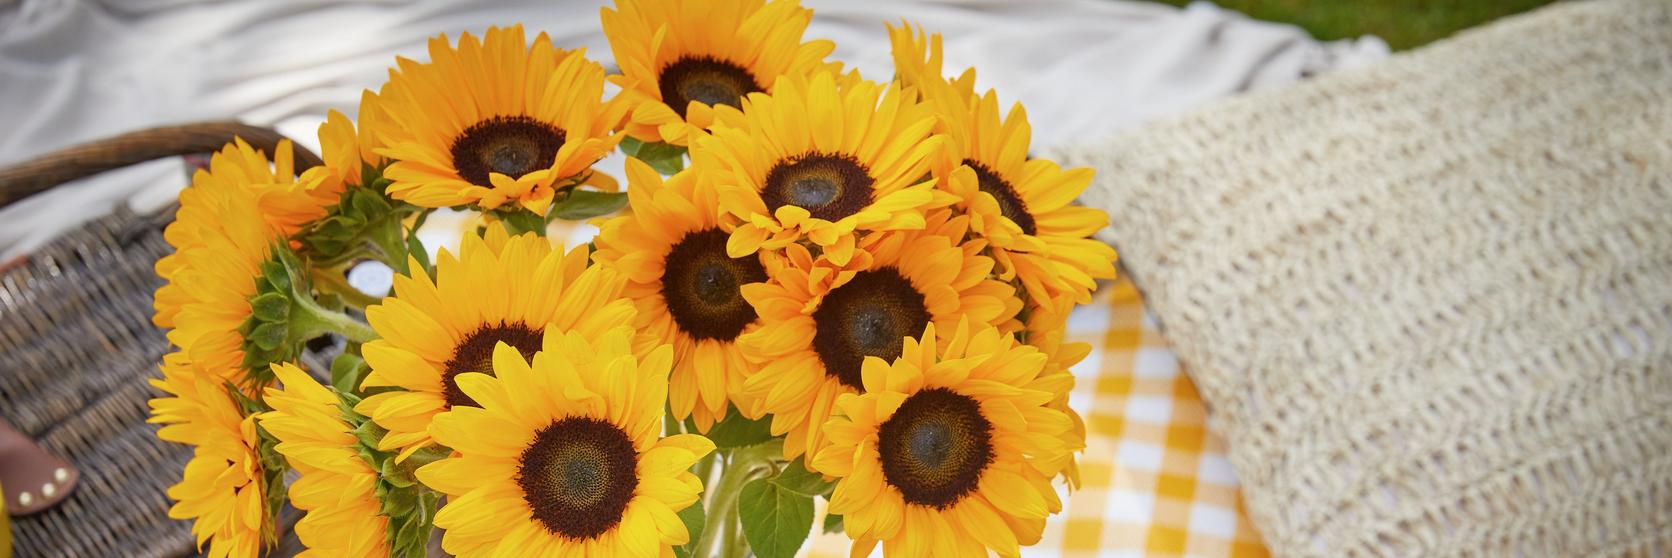 yellow-sunflowers-in-a-vase